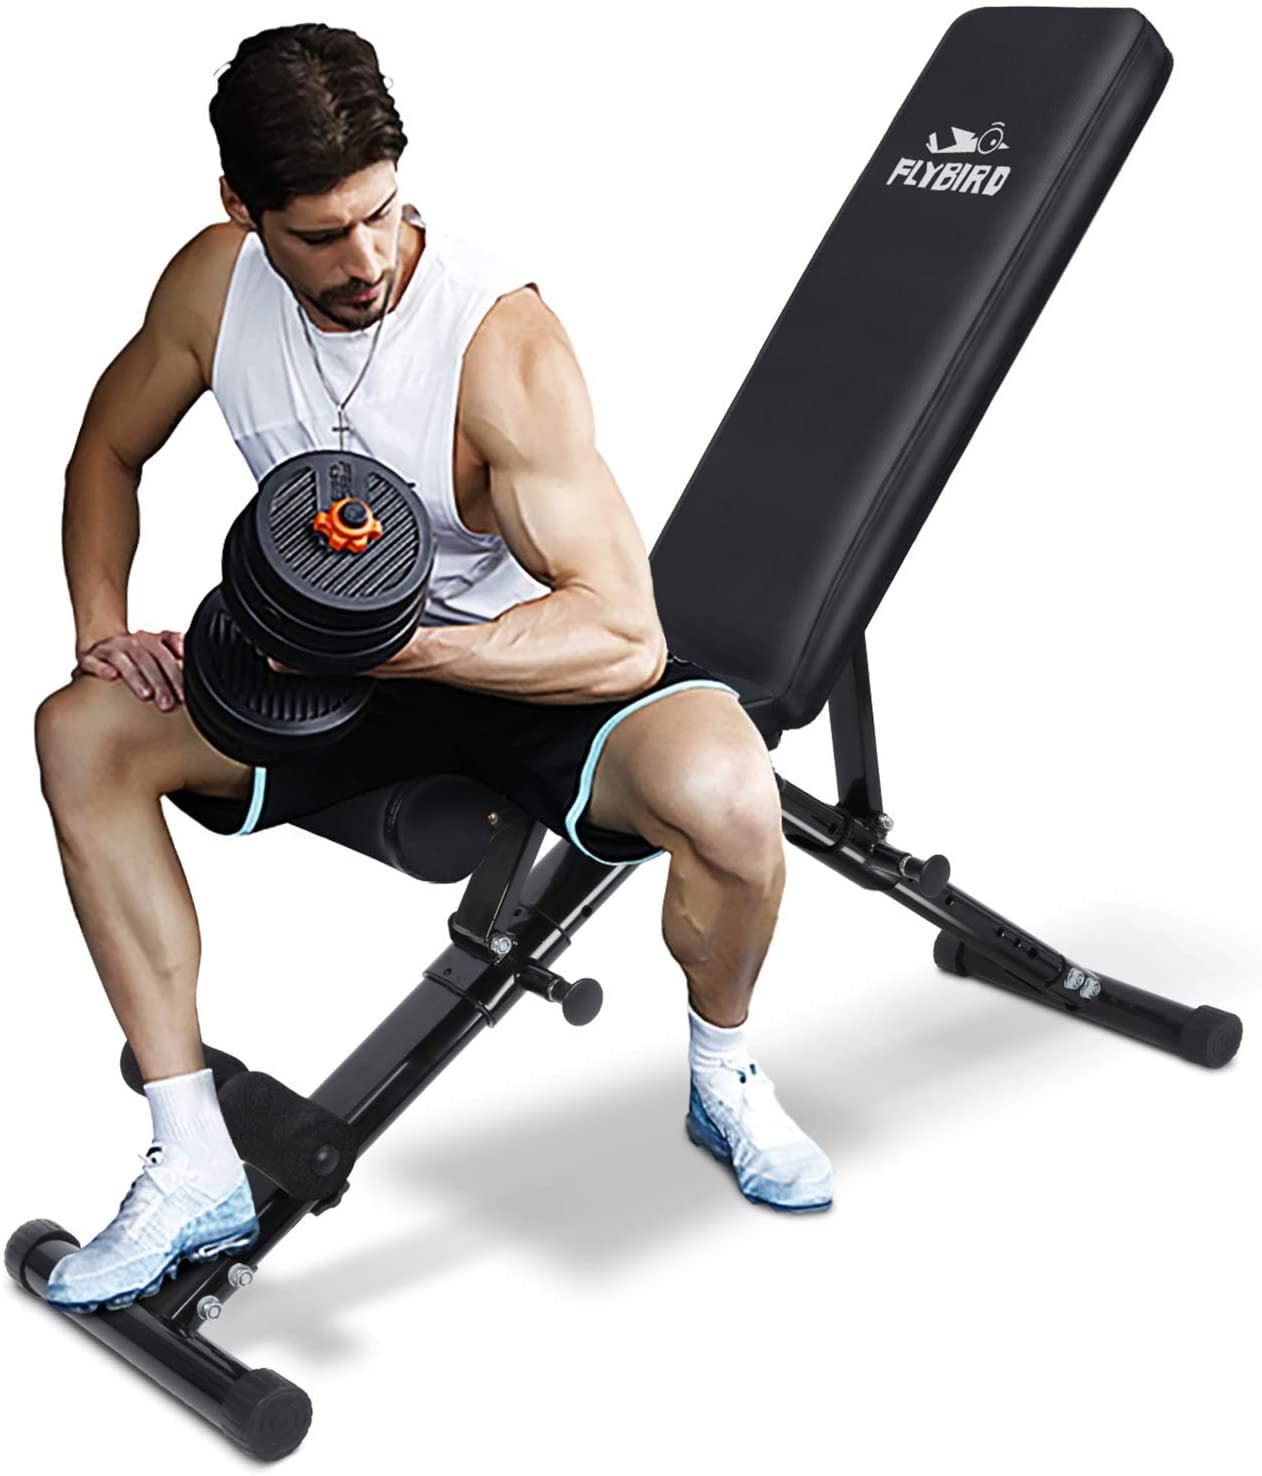 Utility Gym Bench for Full Body Workout Black FLYBIRD Adjustable Weight Bench 